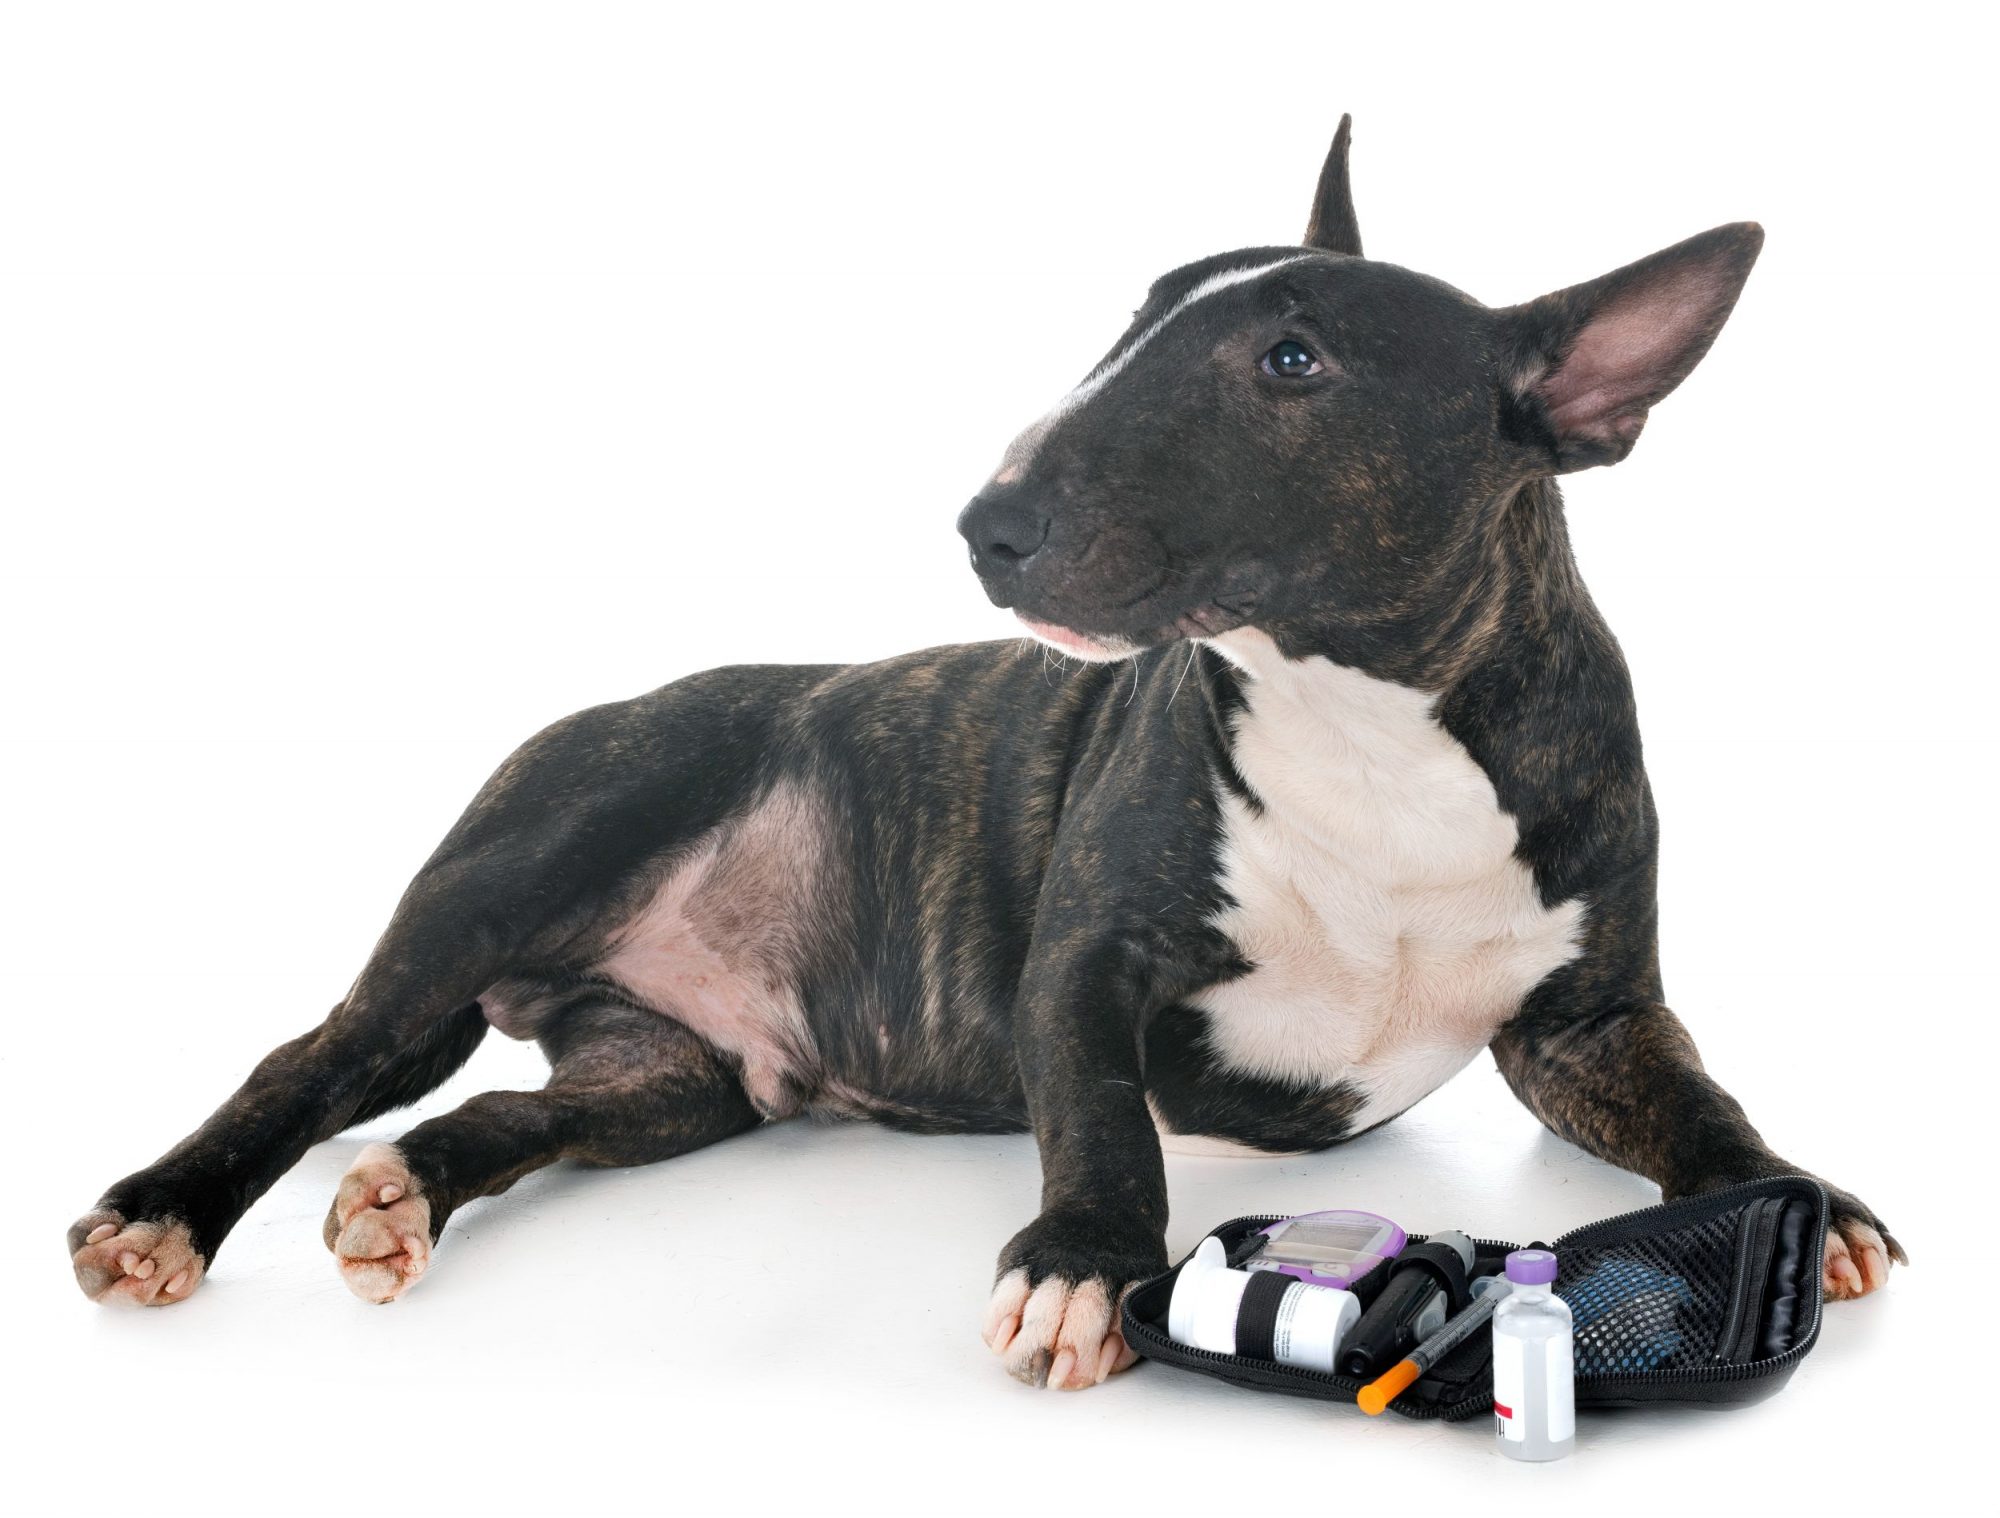 Miniature bull terrier with a diabetes monitoring kit.